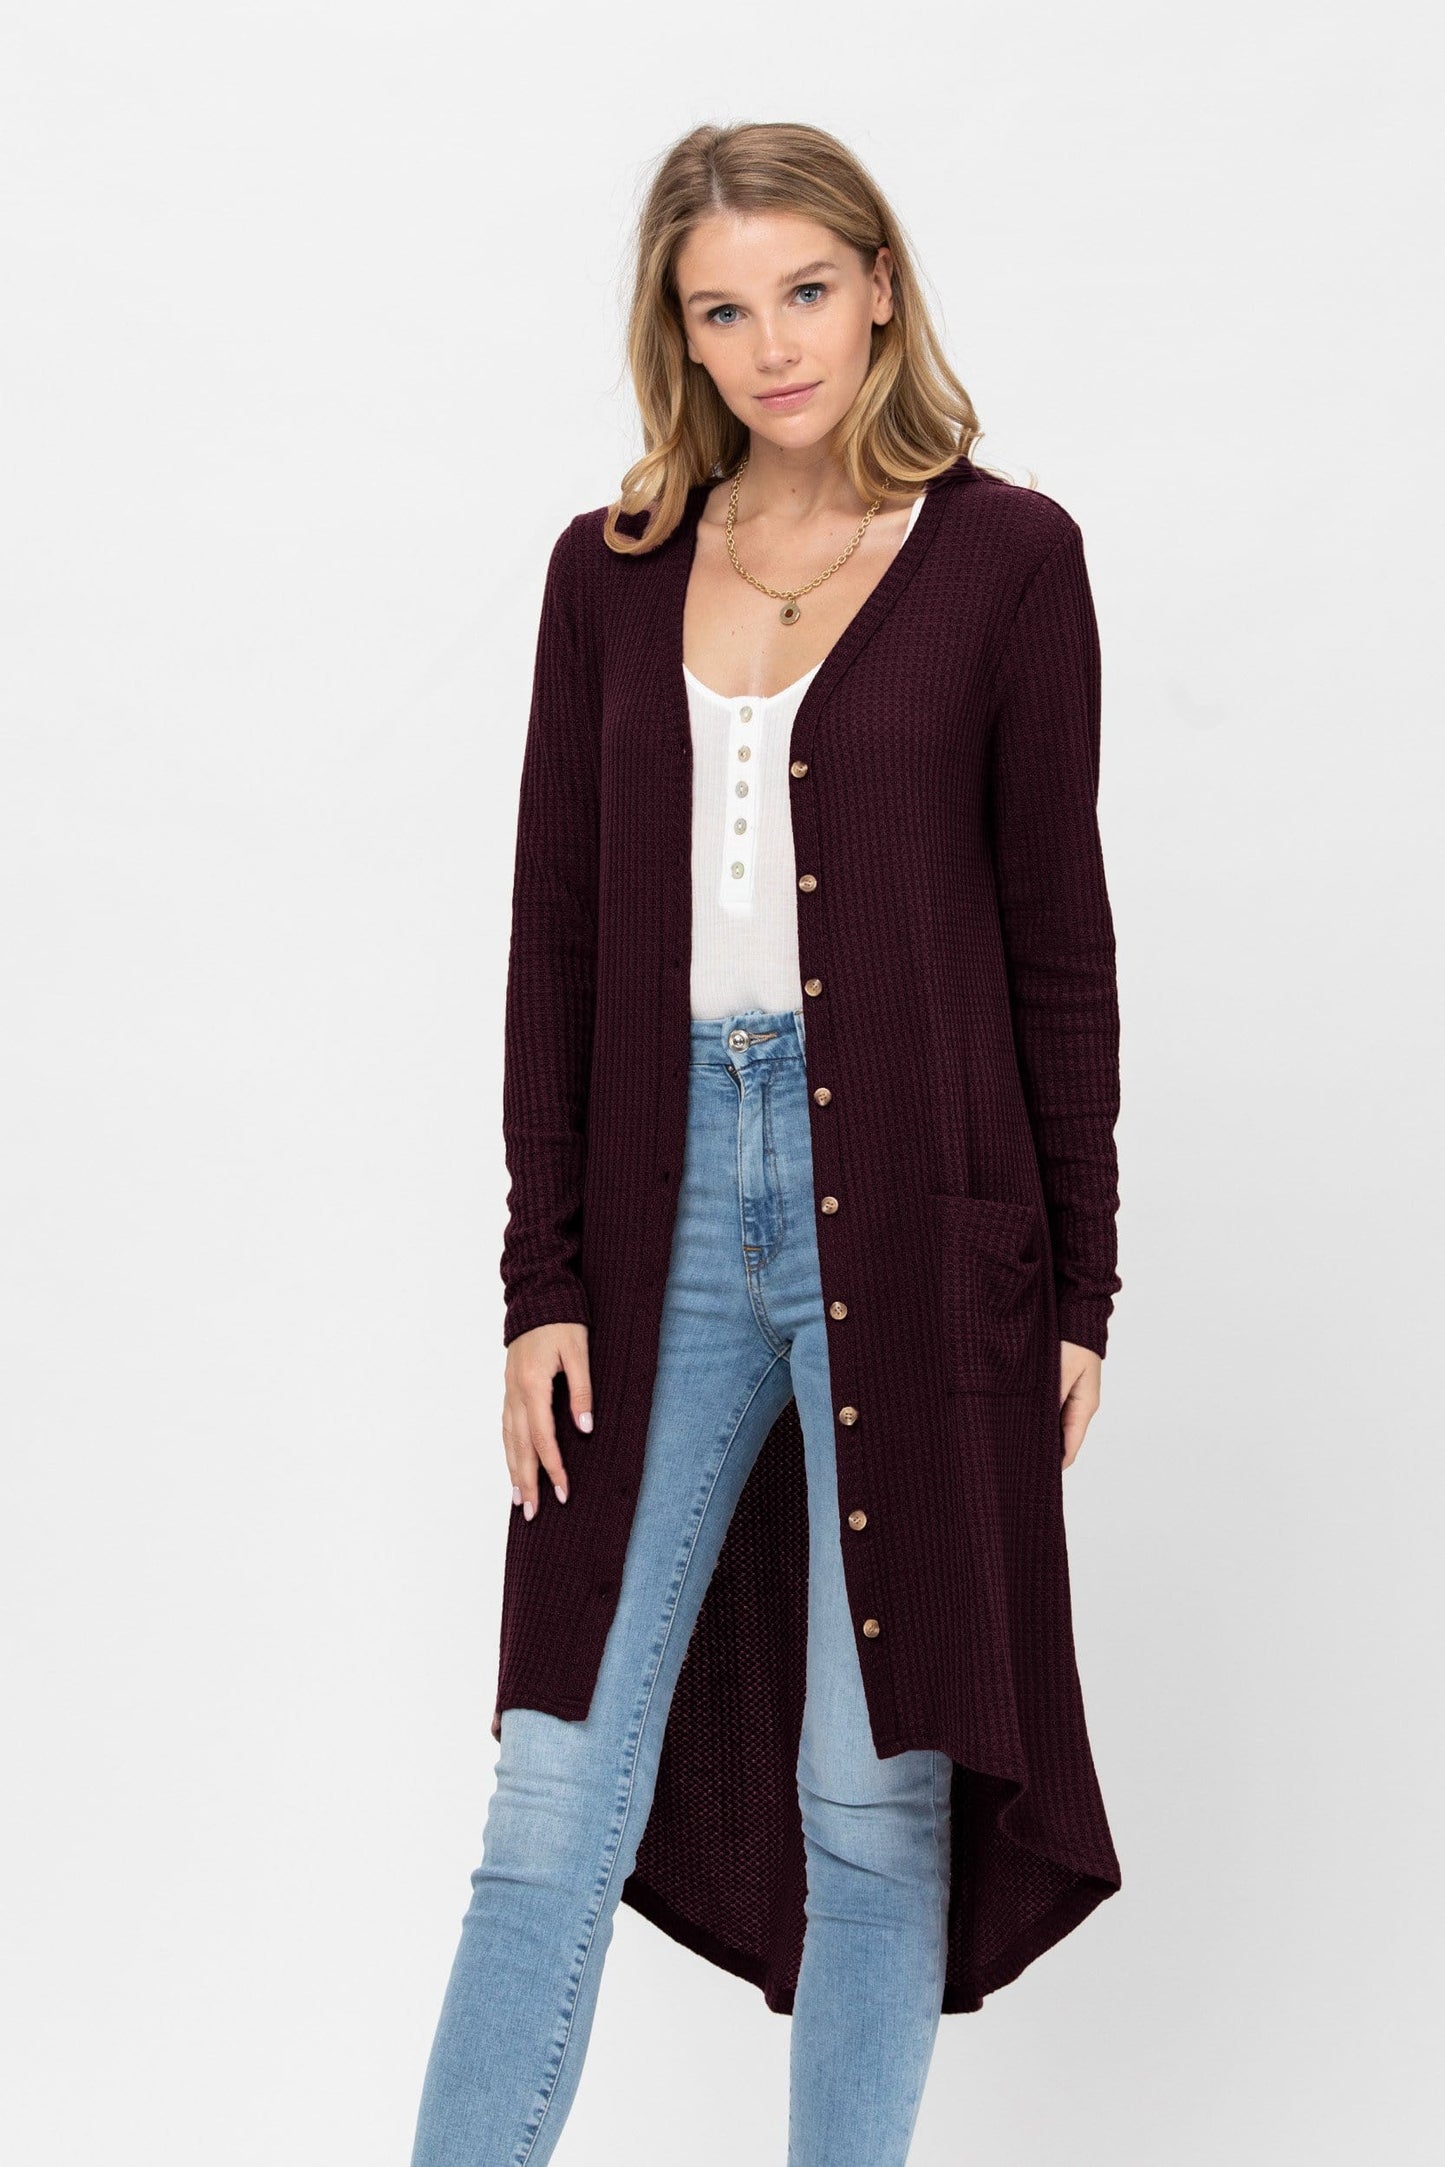 Long Sleeve Button Down Solid Color Knit Cardigans with Pockets